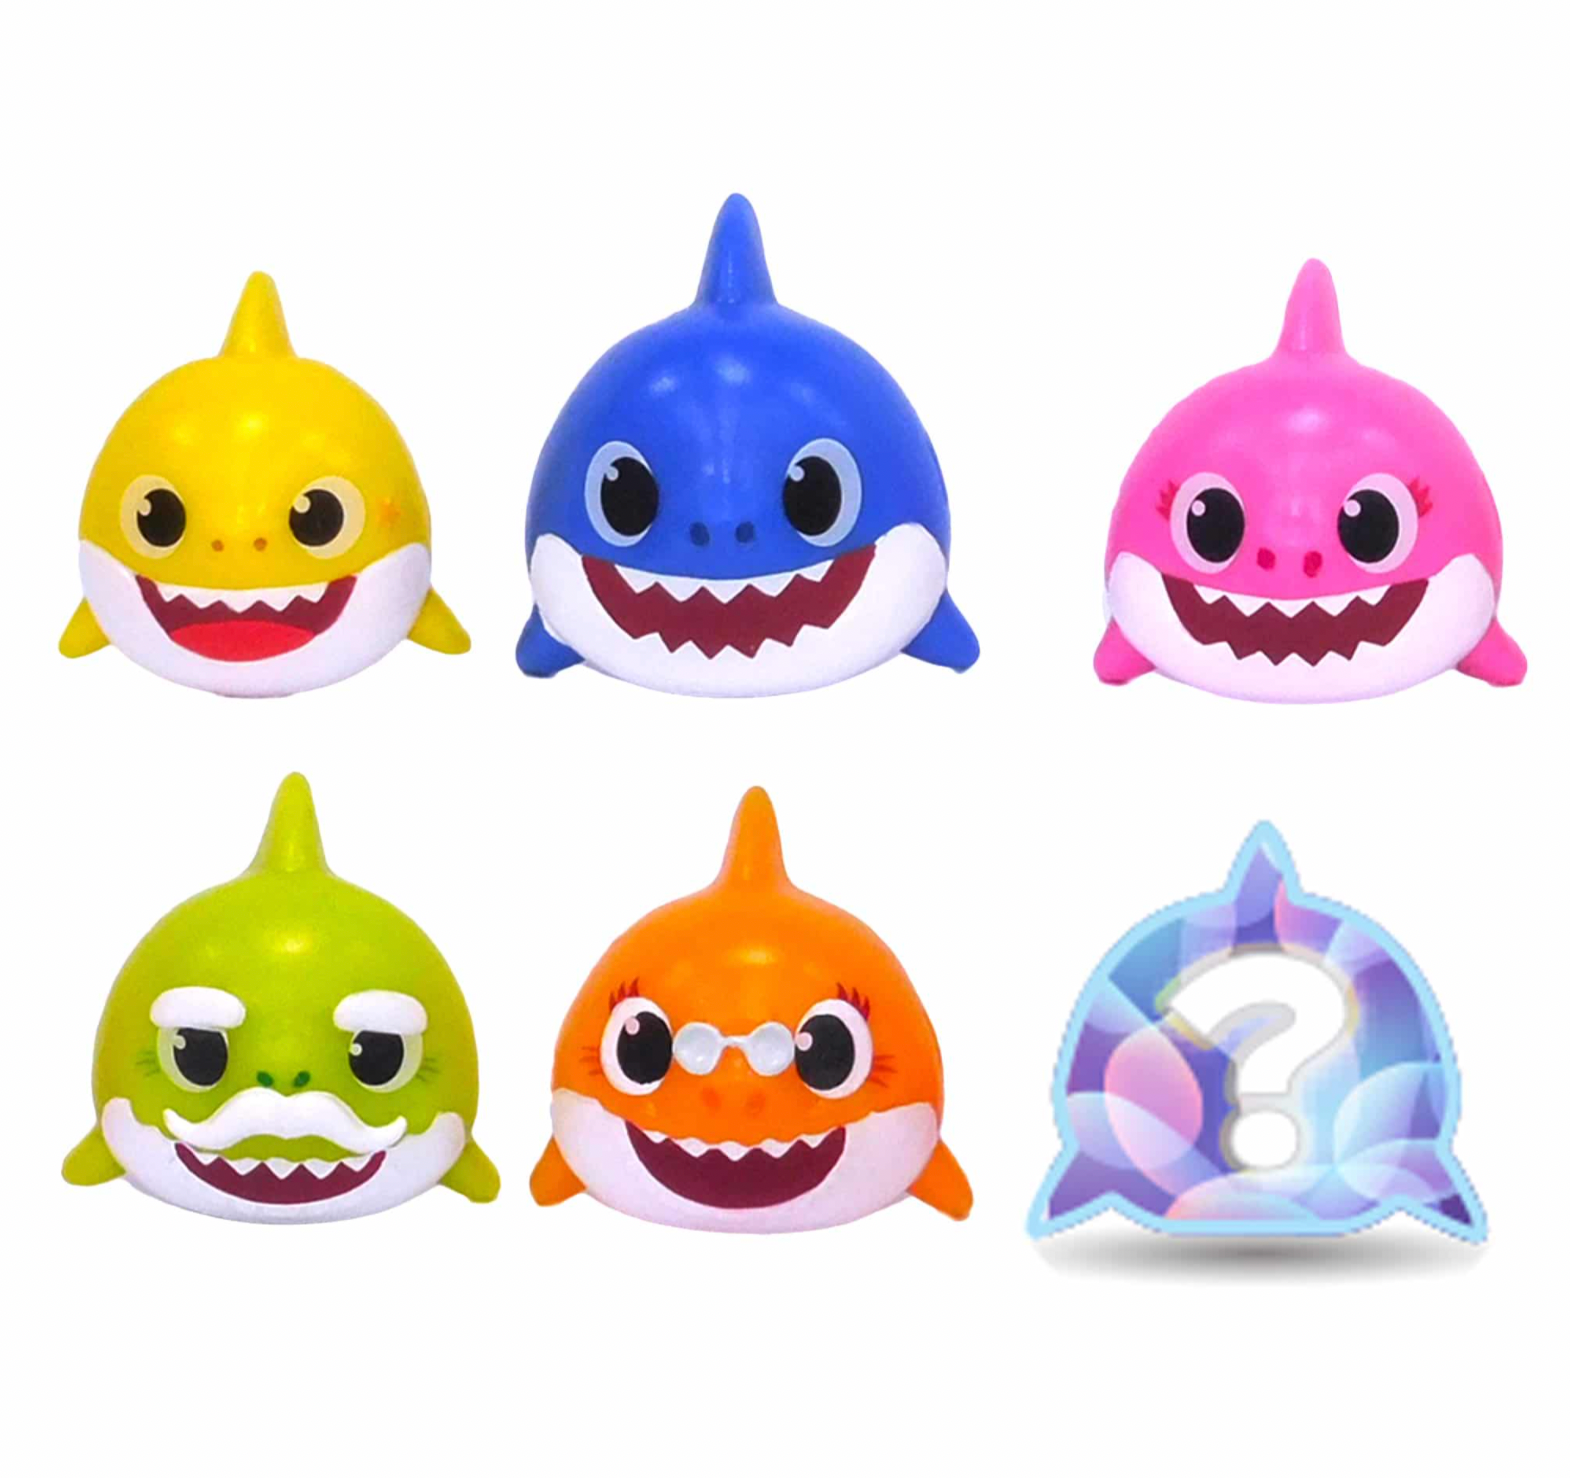 Mash’ems Baby Shark Surprise Toy– Sold Individually